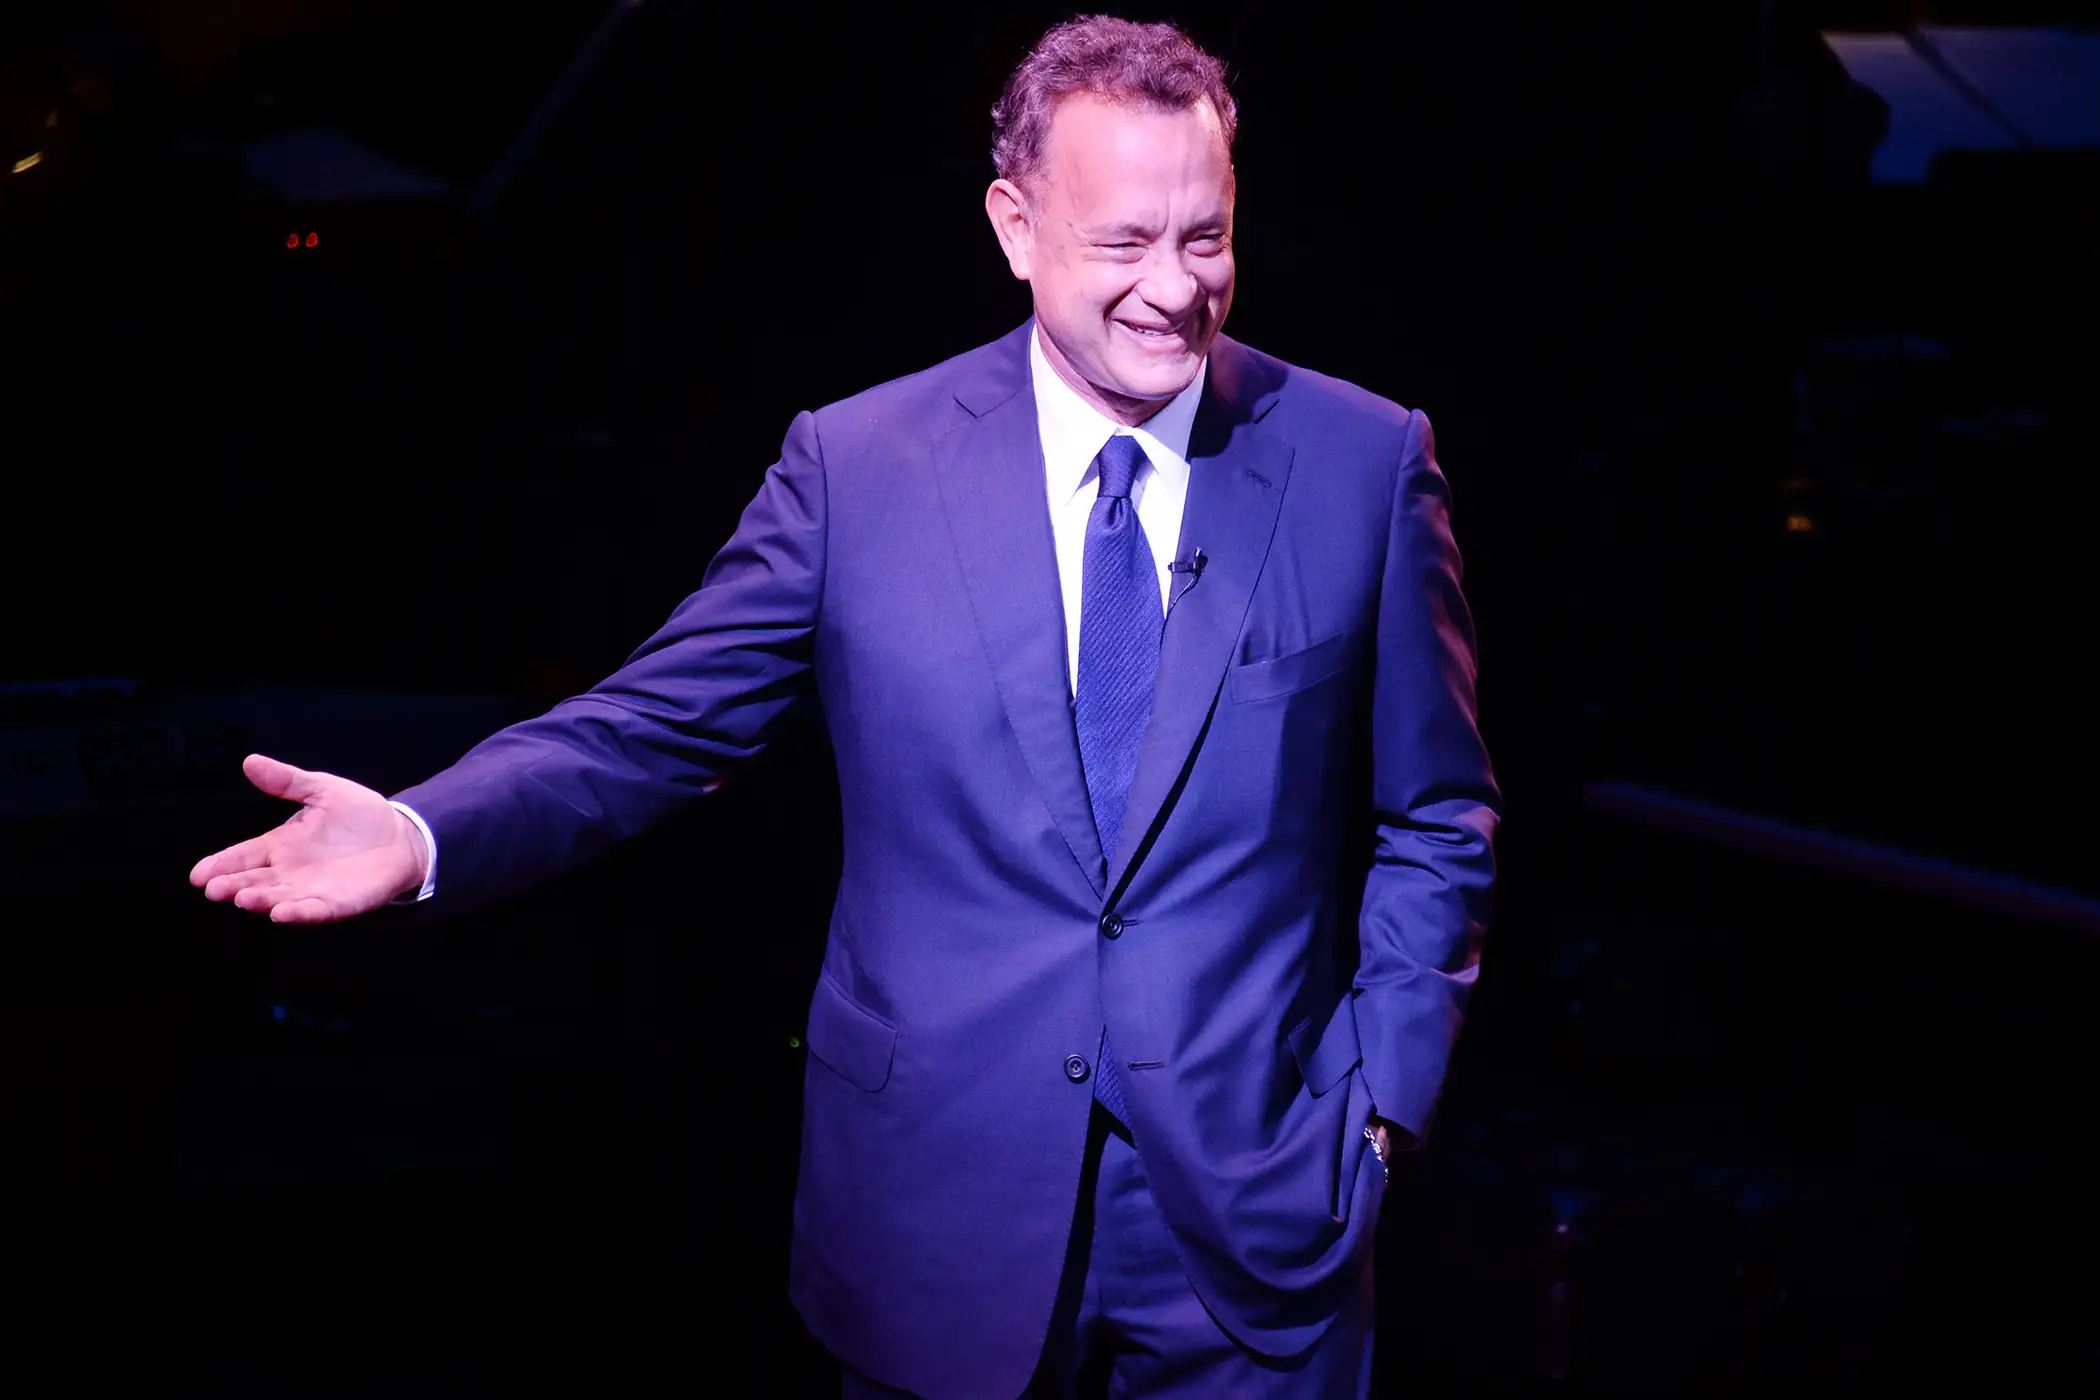 Tom Hanks at SeriousFun Children's Network Celebrates The Legacy Of Paul Newman Held At Avery Fisher Hall, New York City, March 2, 2015.